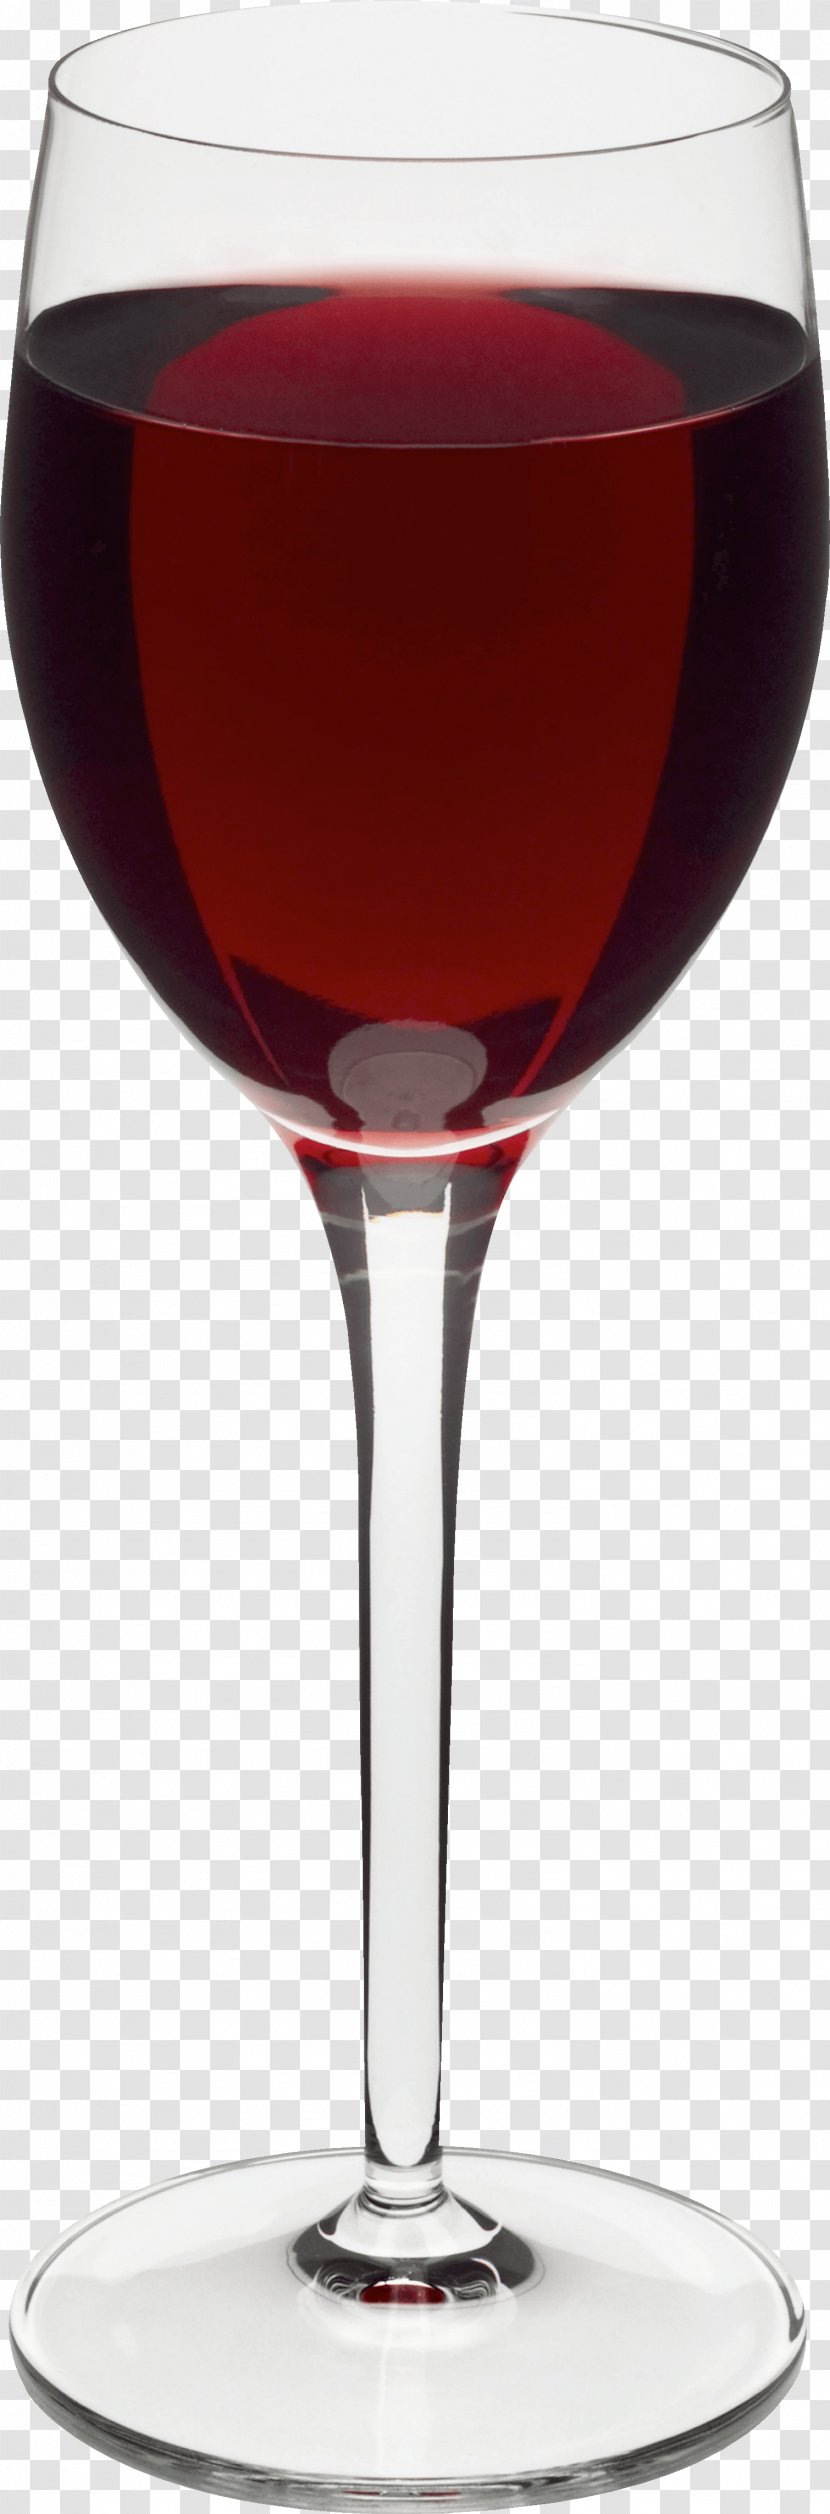 Red Wine White Champagne Cocktail Glass - Stemware Transparent PNG